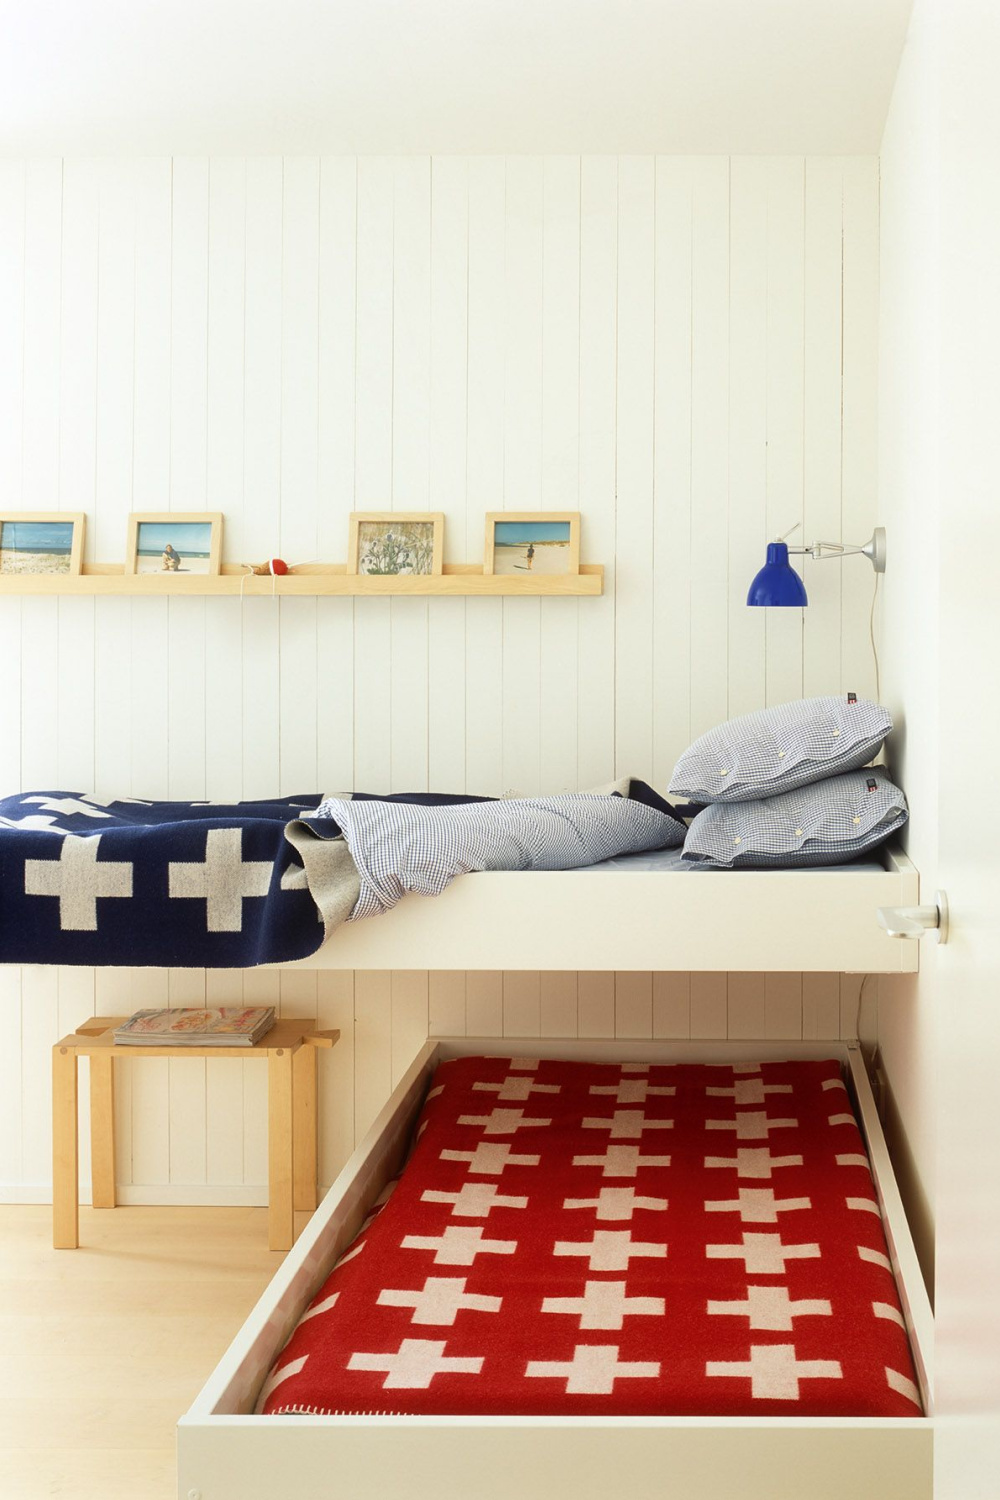 L-shaped custom bunks with cross wool blankets in red and blue -from The Bunk Bed Book (Gibbs Smith, 2022) by Laura Fenton. #bunkbeds